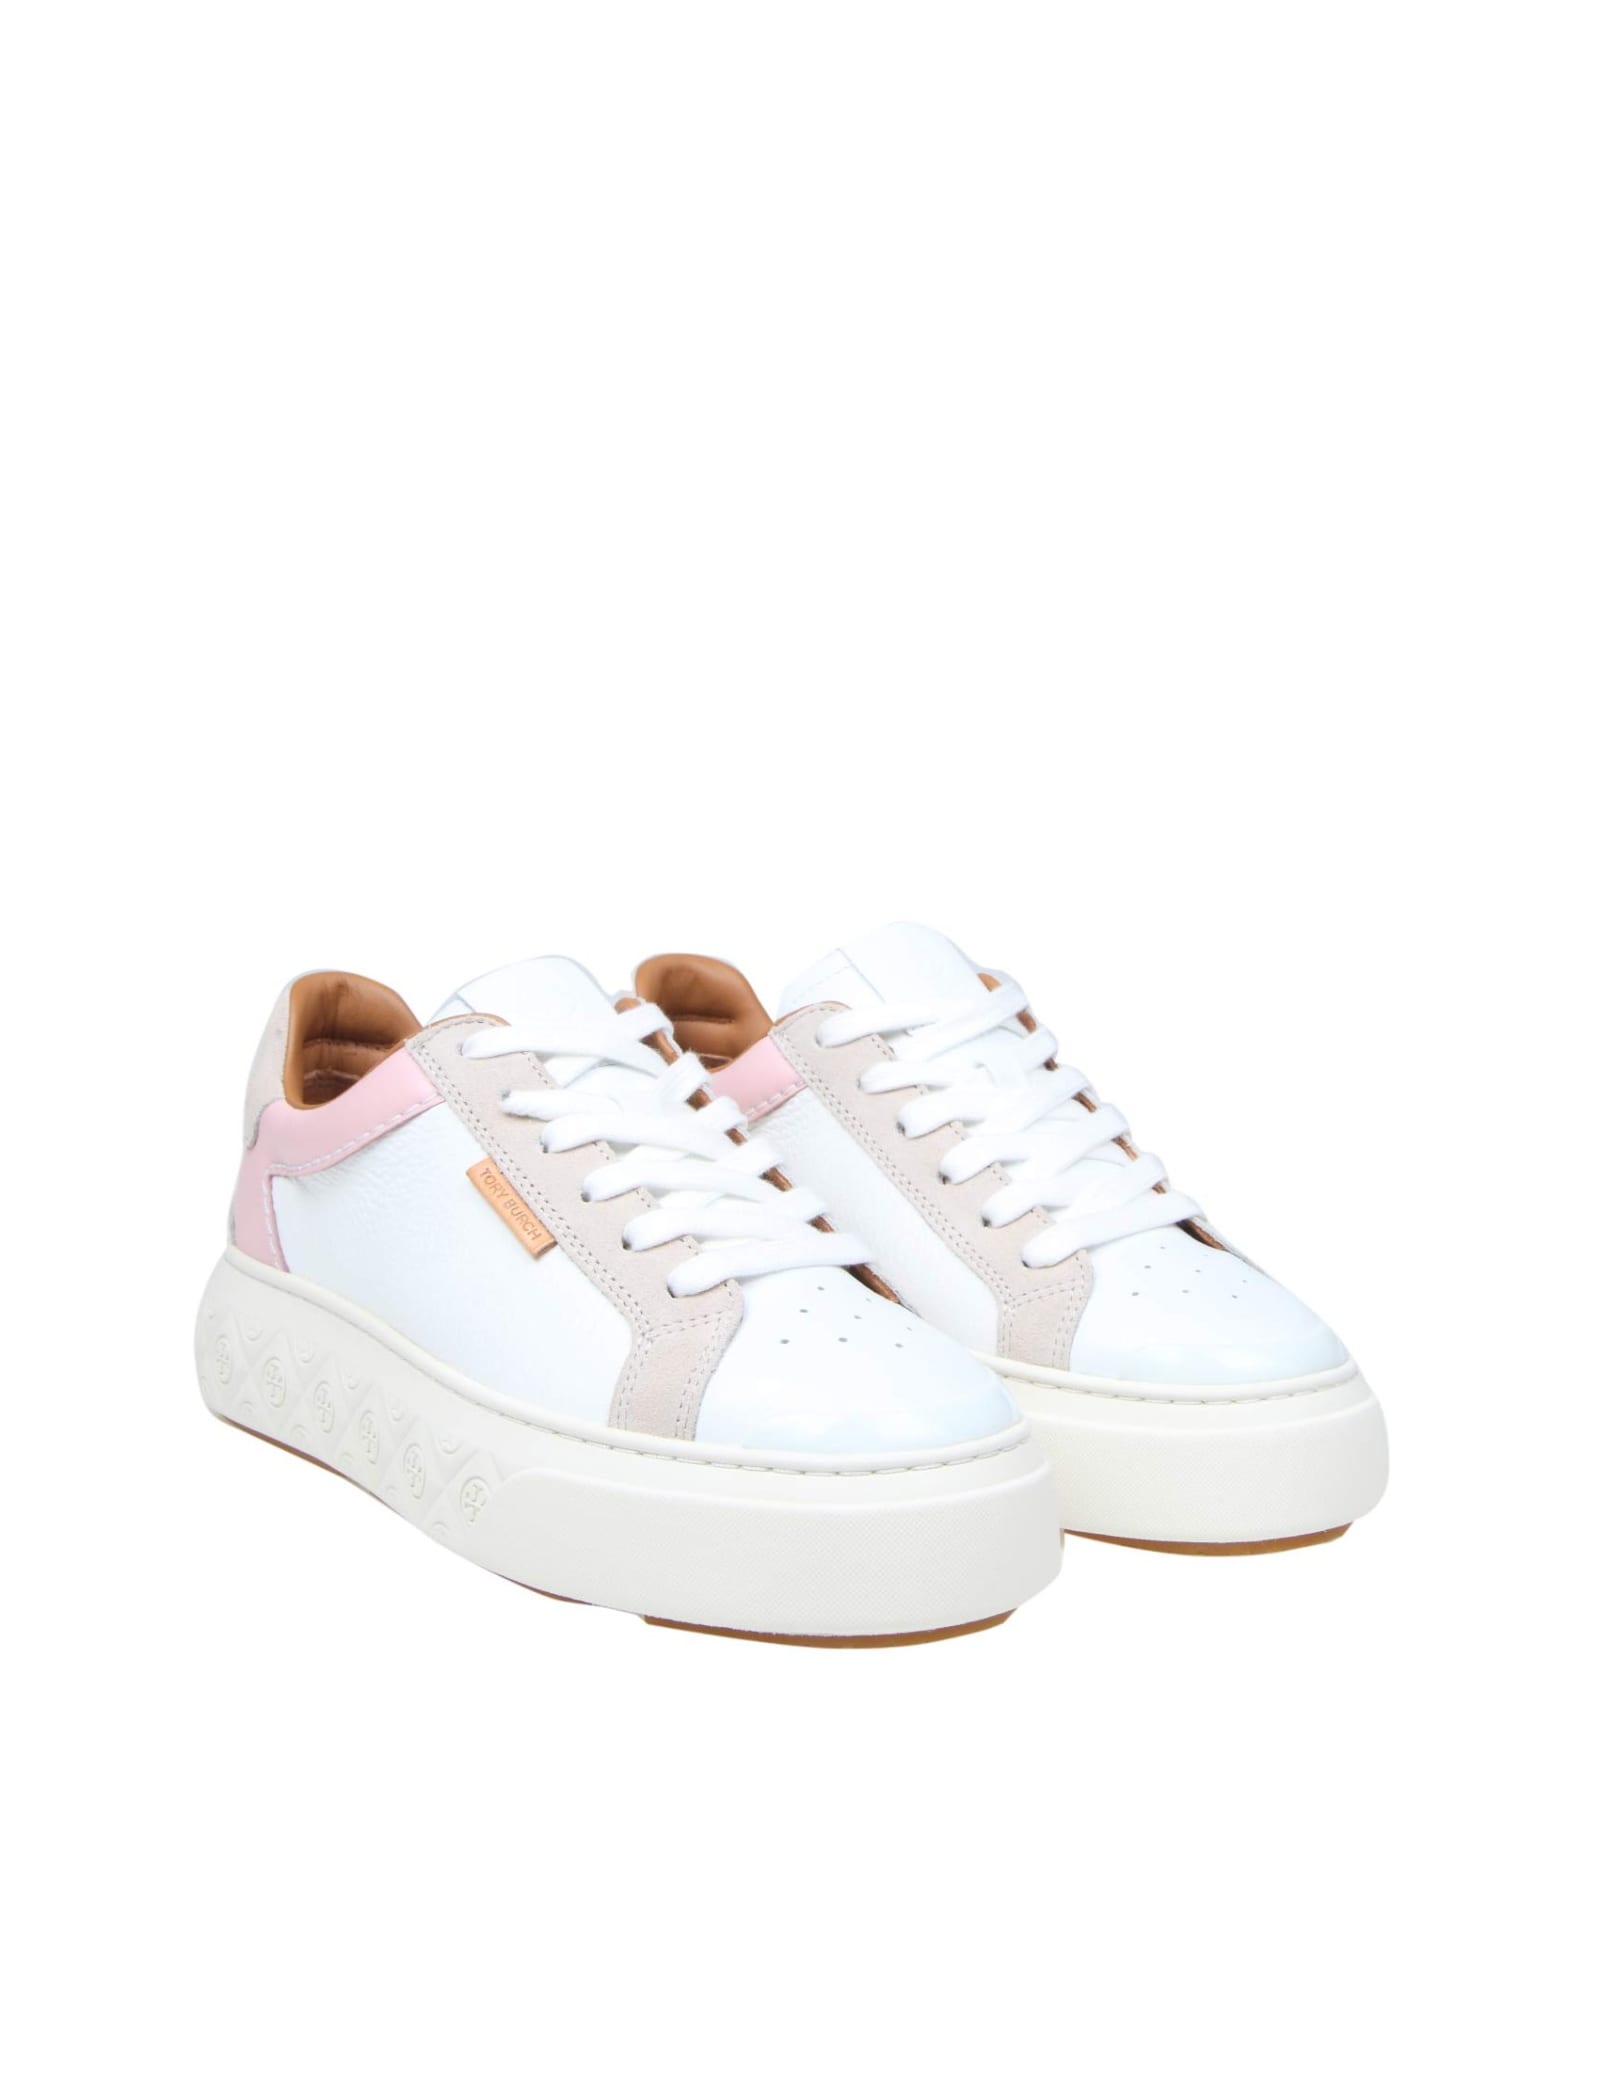 Shop Tory Burch Ladybug Sneakers In White And Pink Leather In White/rose